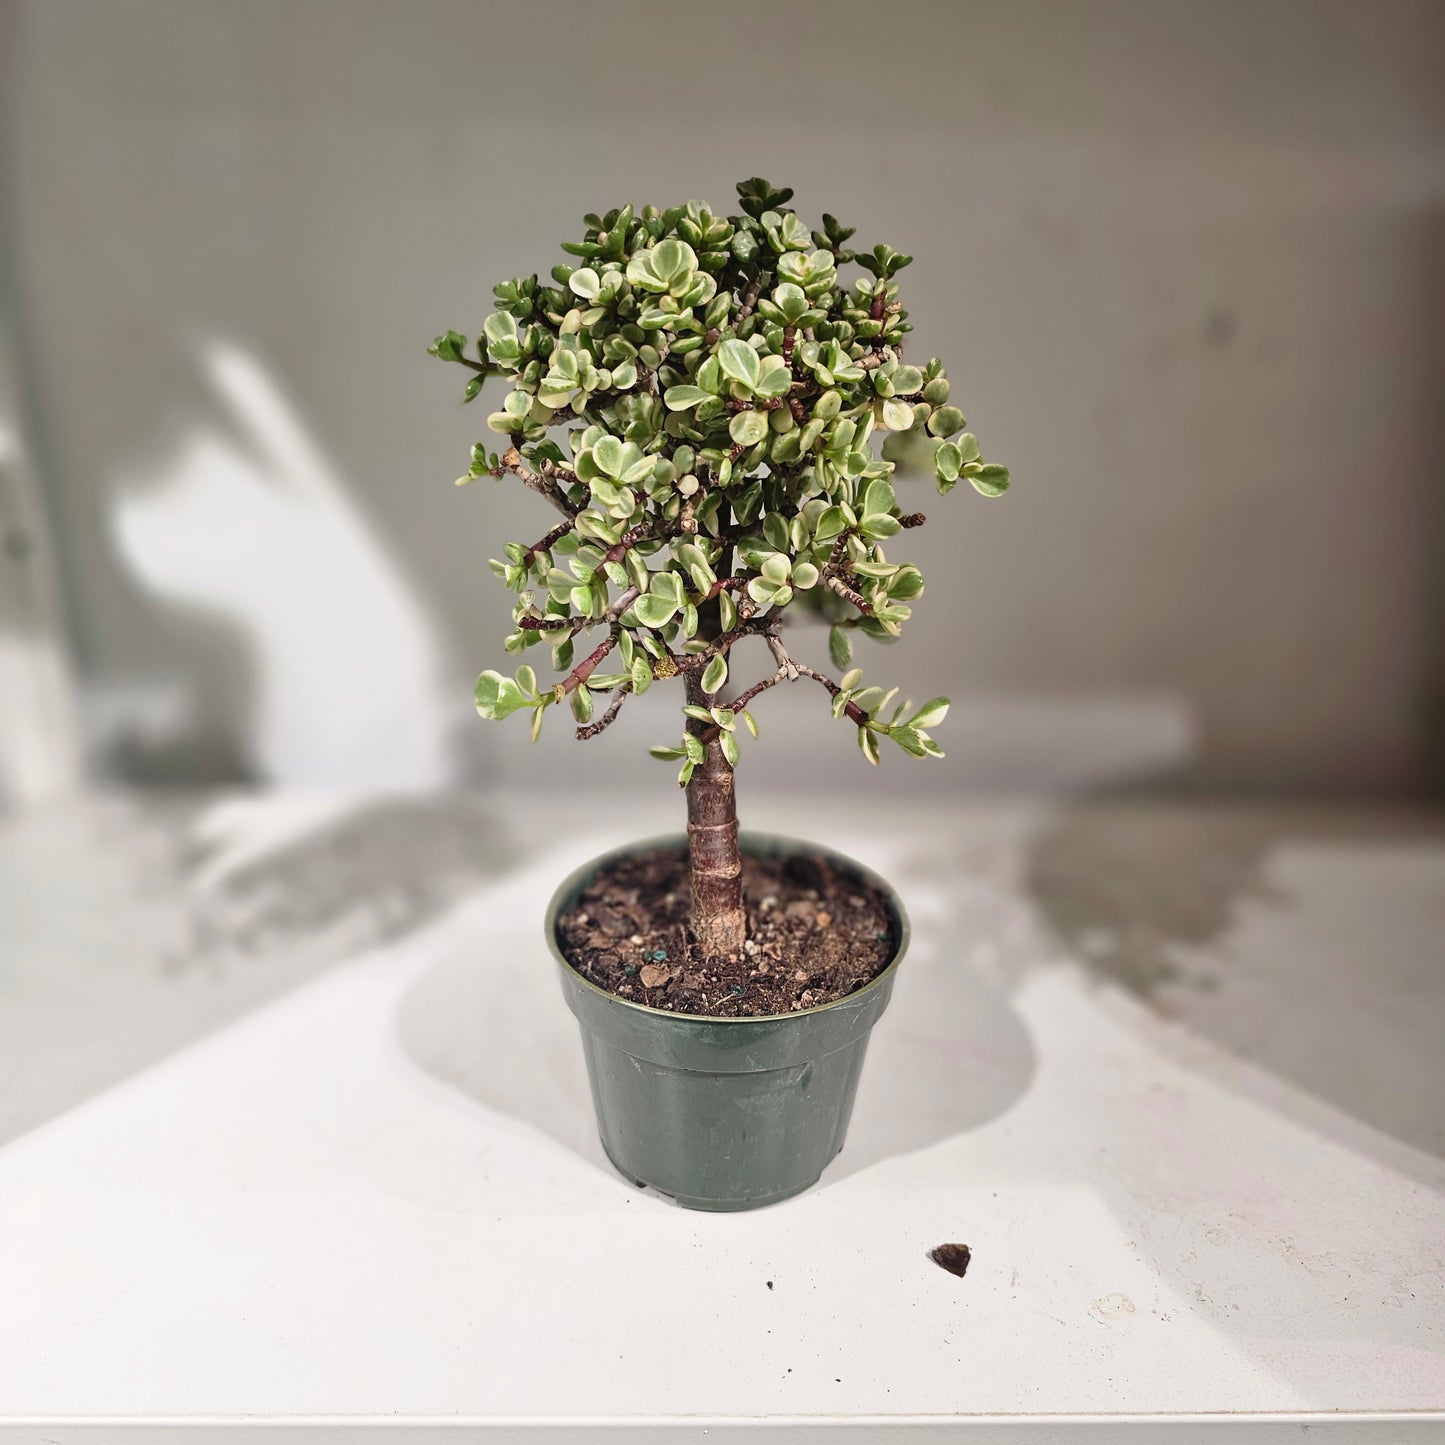 Elephant Bush Jade (Portulacaria afra) in a 4 inch pot. Indoor plant for sale by Promise Supply for delivery and pickup in Toronto